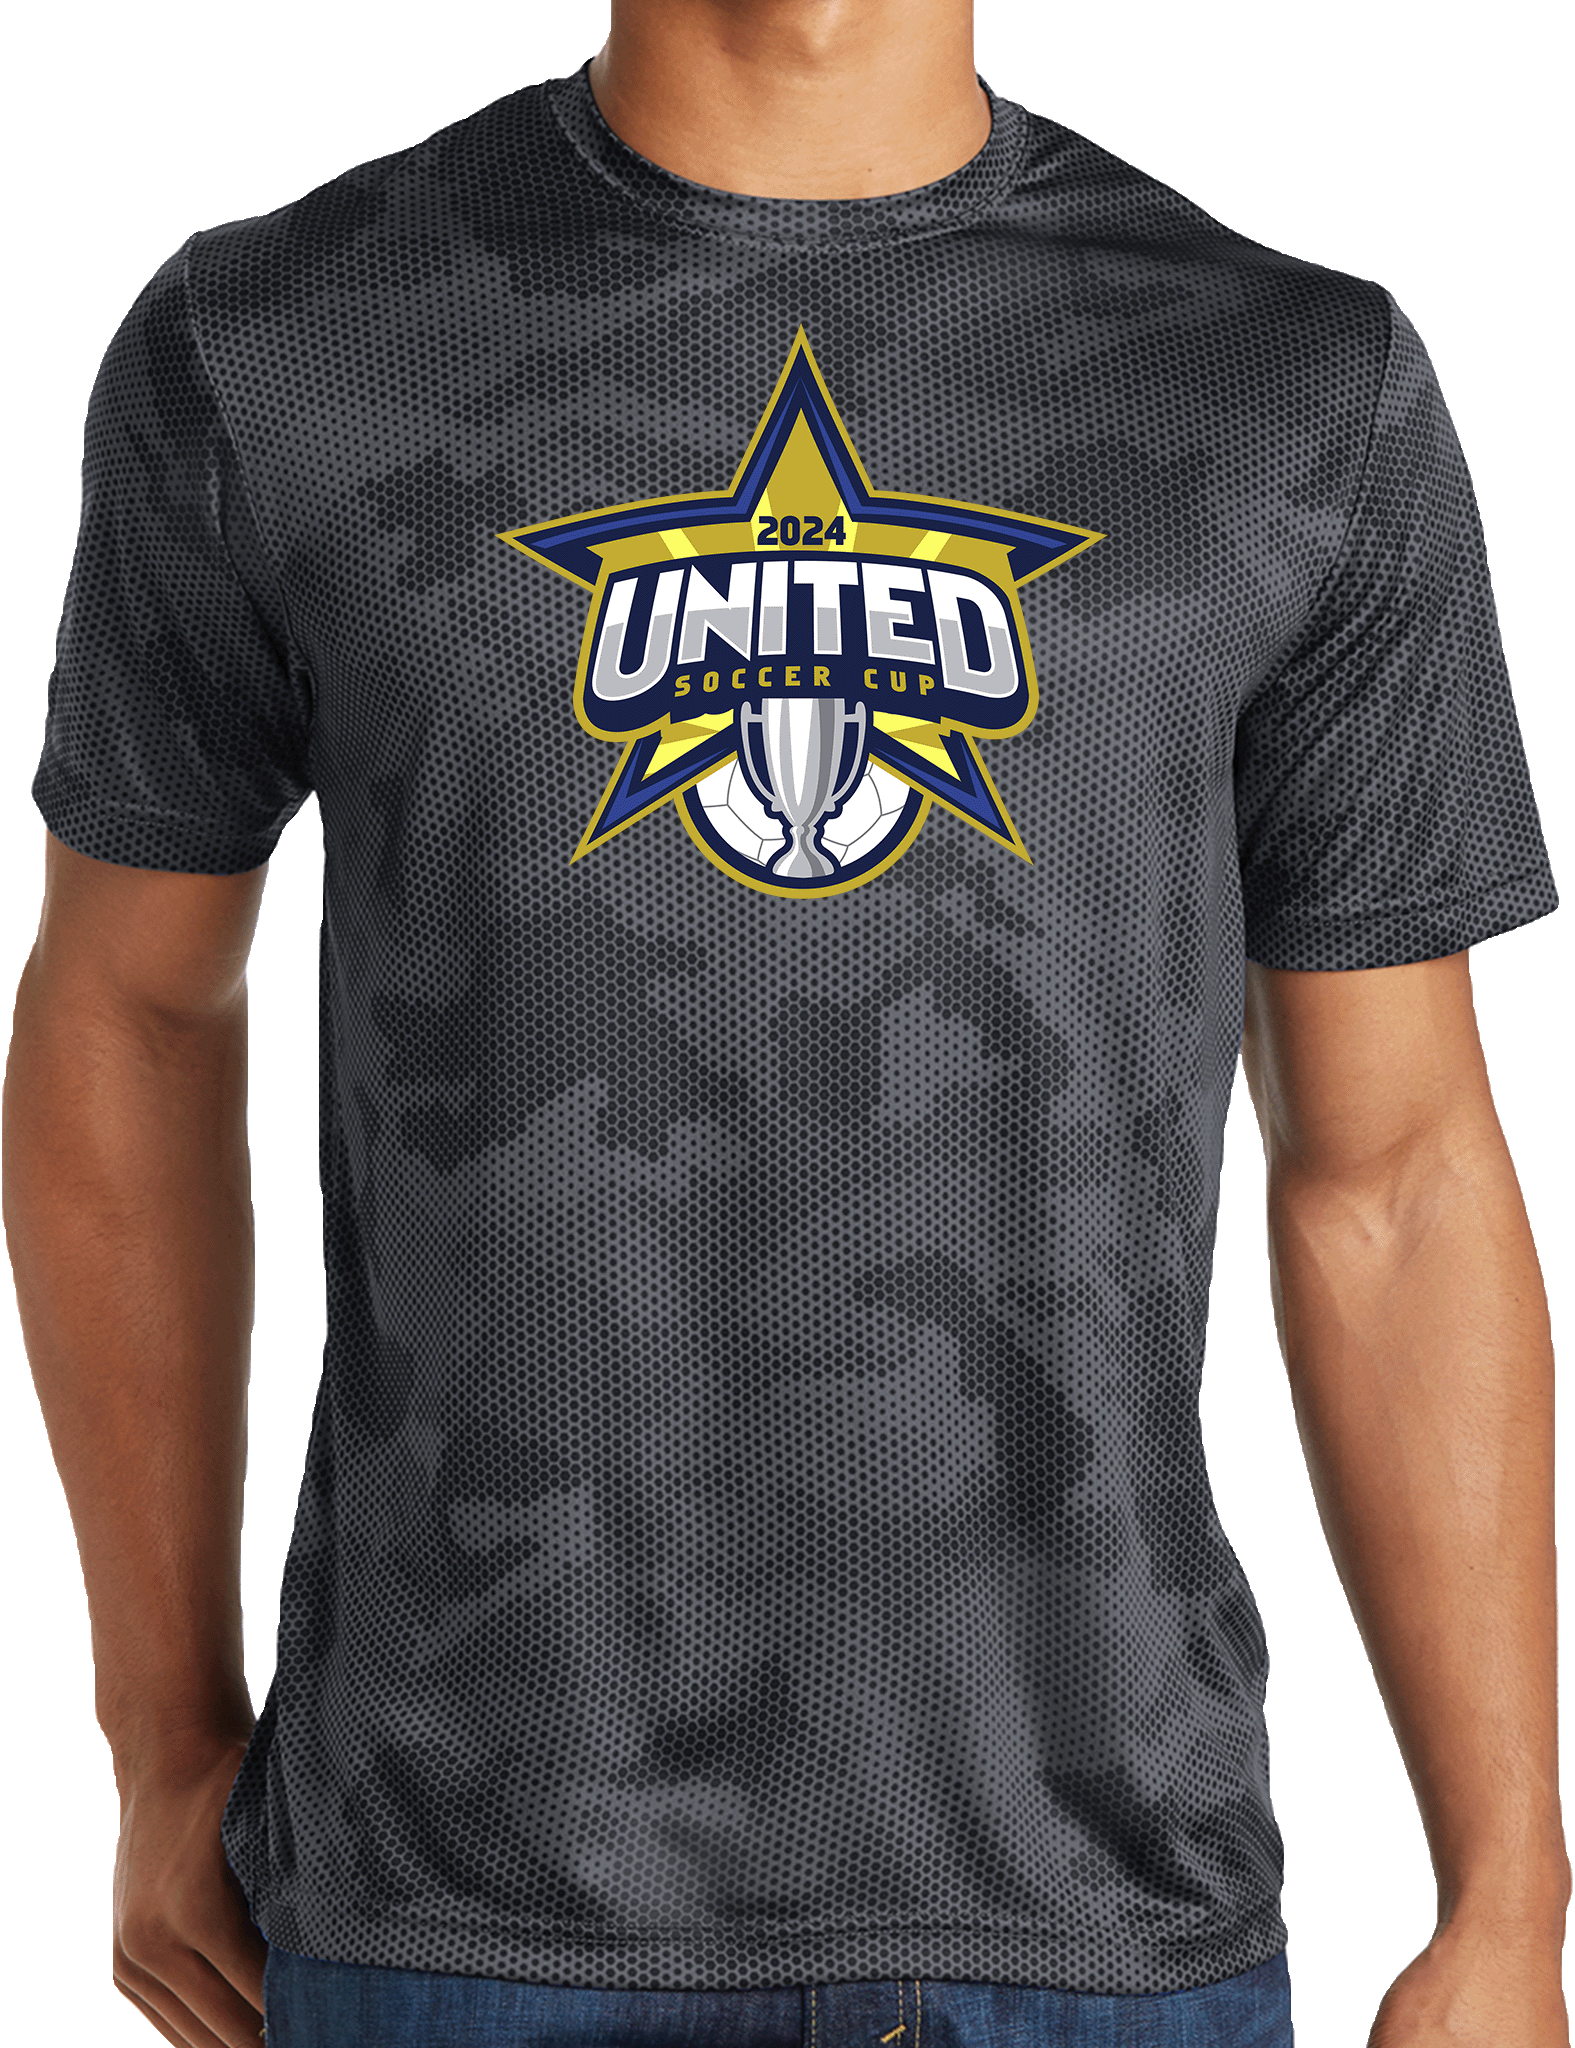 Performance Shirts - 2024 United Soccer Cup